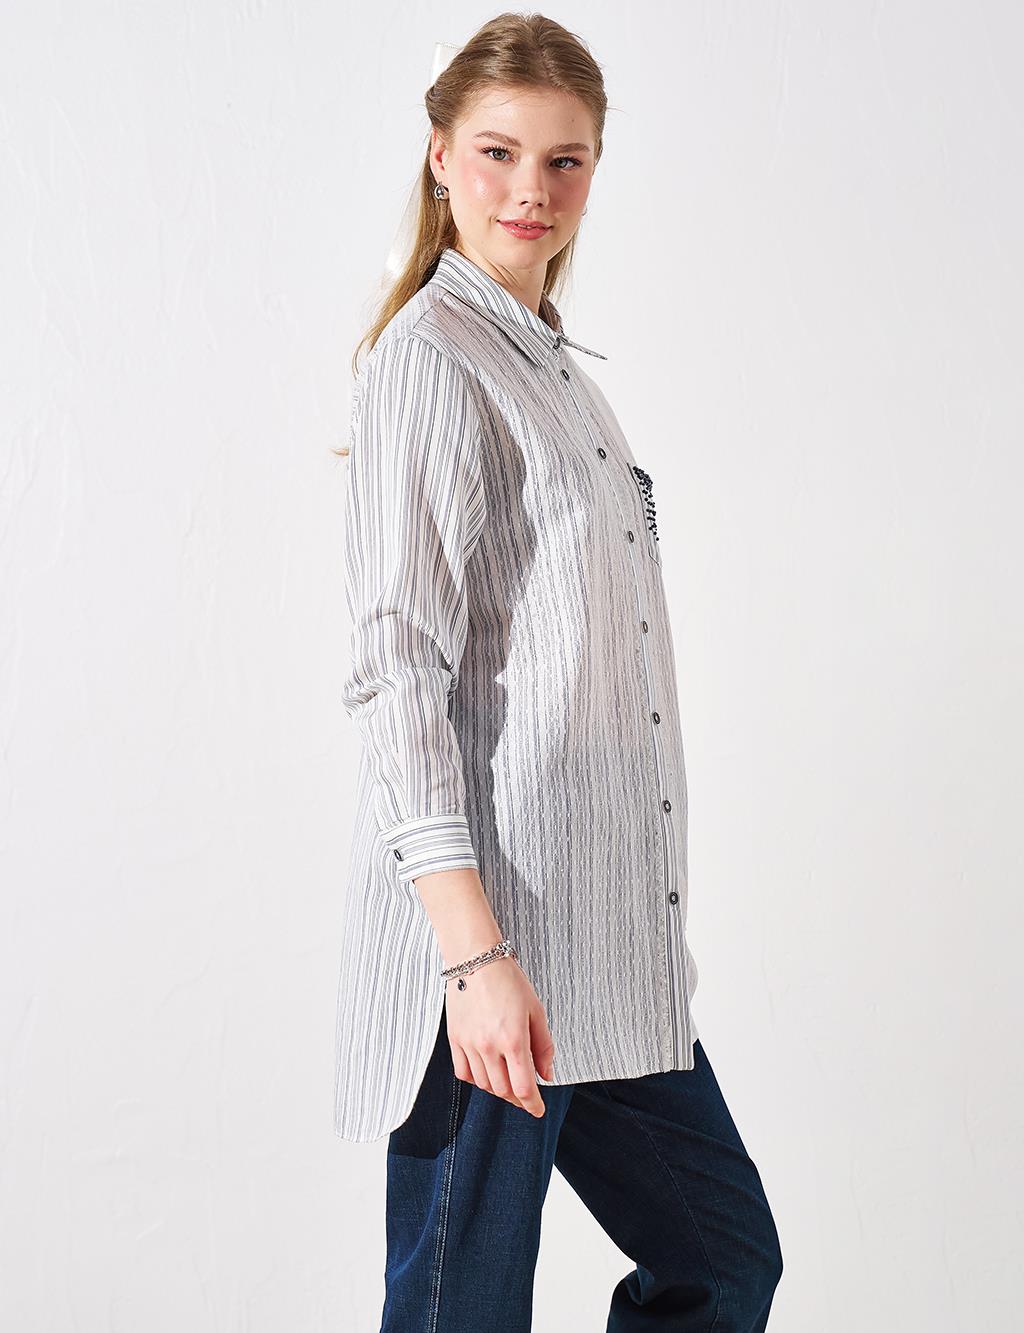 Embroidered Shirt Collar Tunic Navy Blue-Green